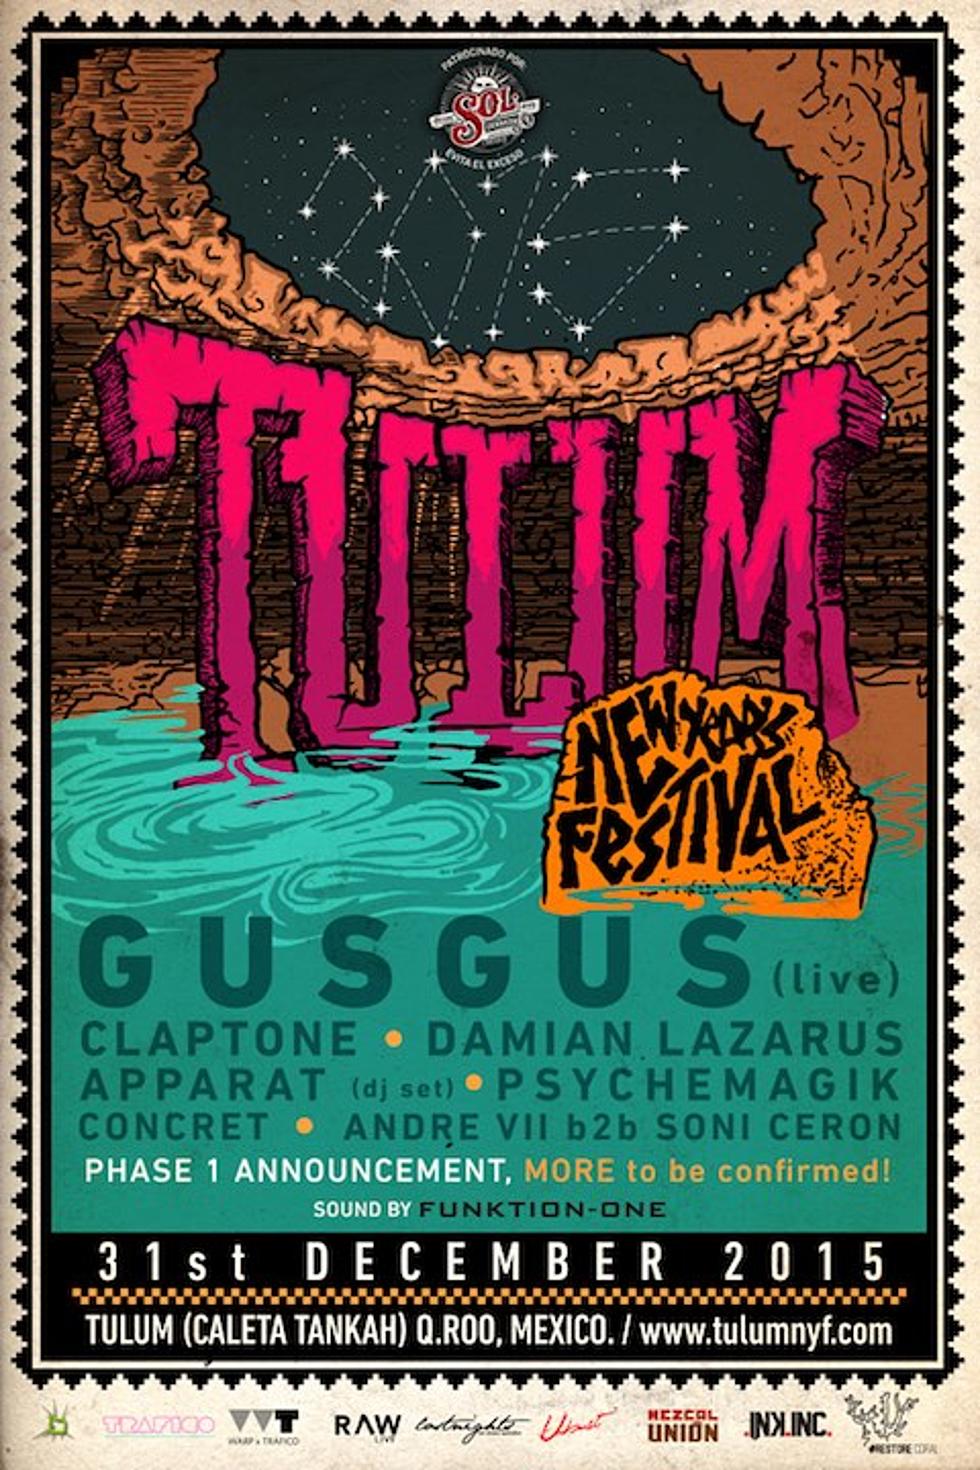 Gus Gus, Apparat, Psychemagik and more playing Mexico&#8217;s Tulum New Year&#8217;s Festival; XLR8R throwing one a week later